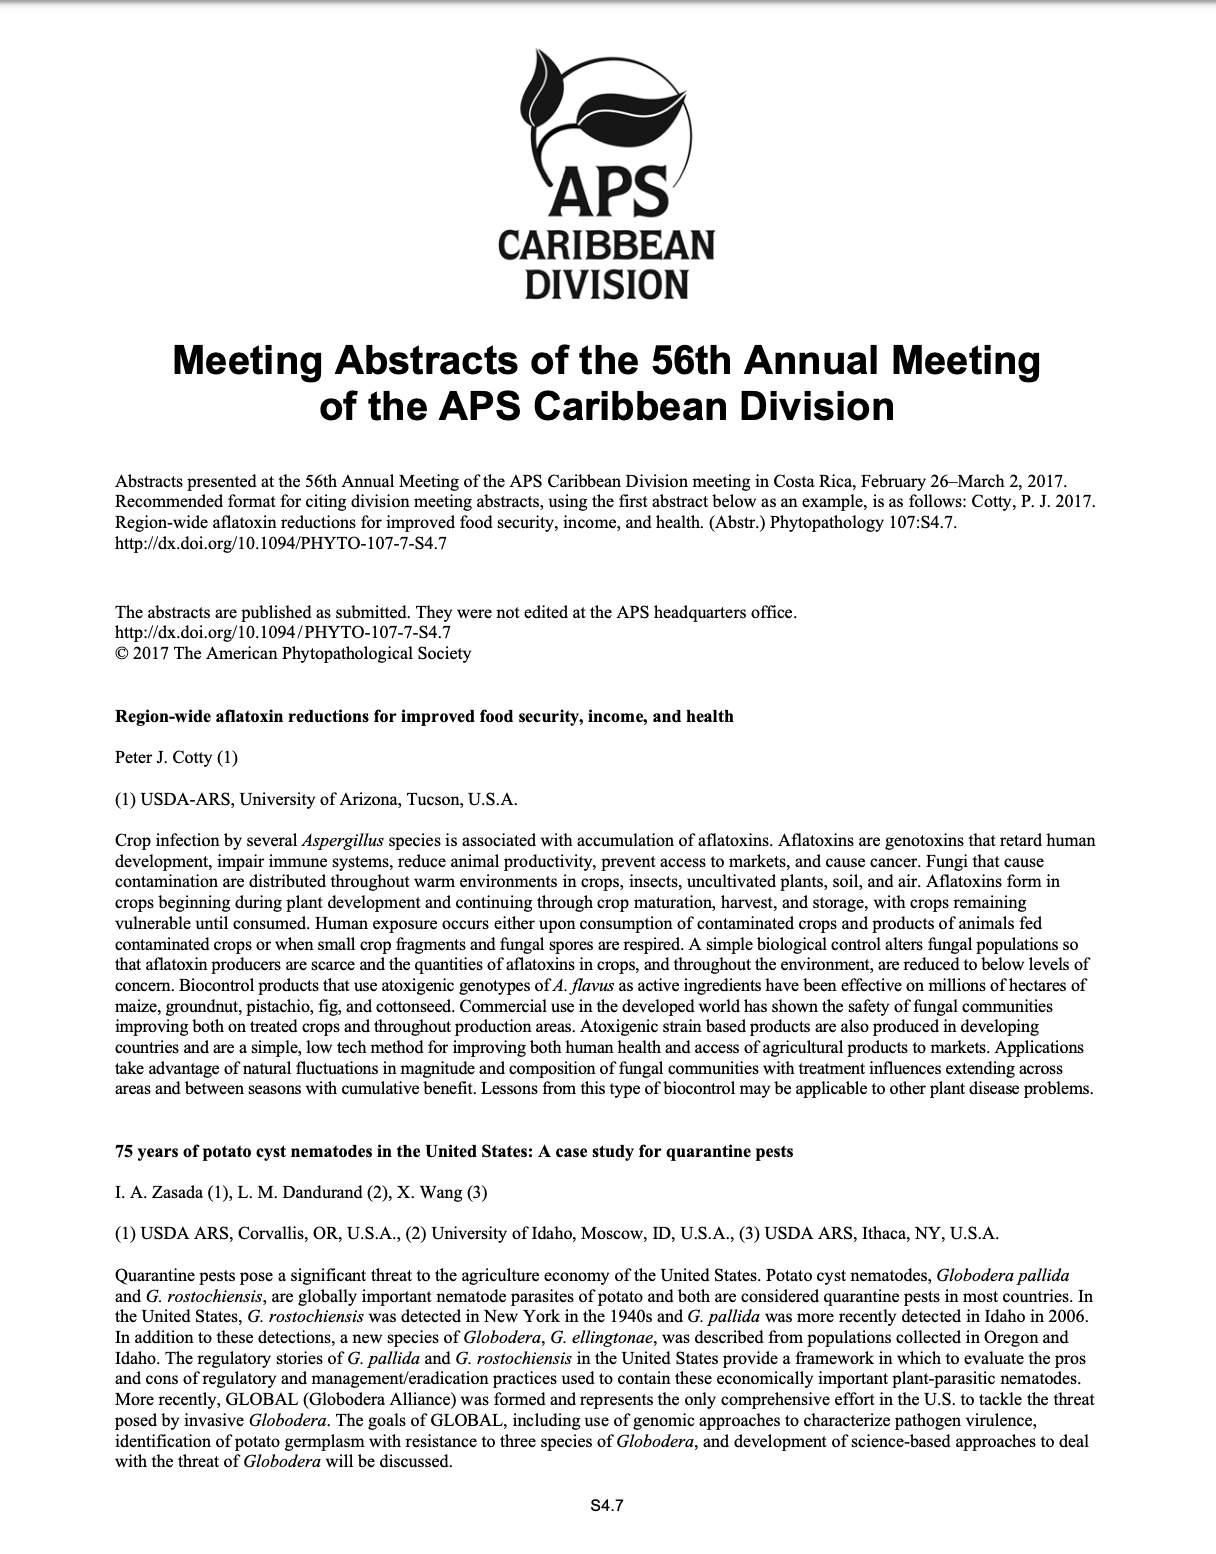 Meeting Abstracts of the 56th Annual Meeting of the APS Caribbean